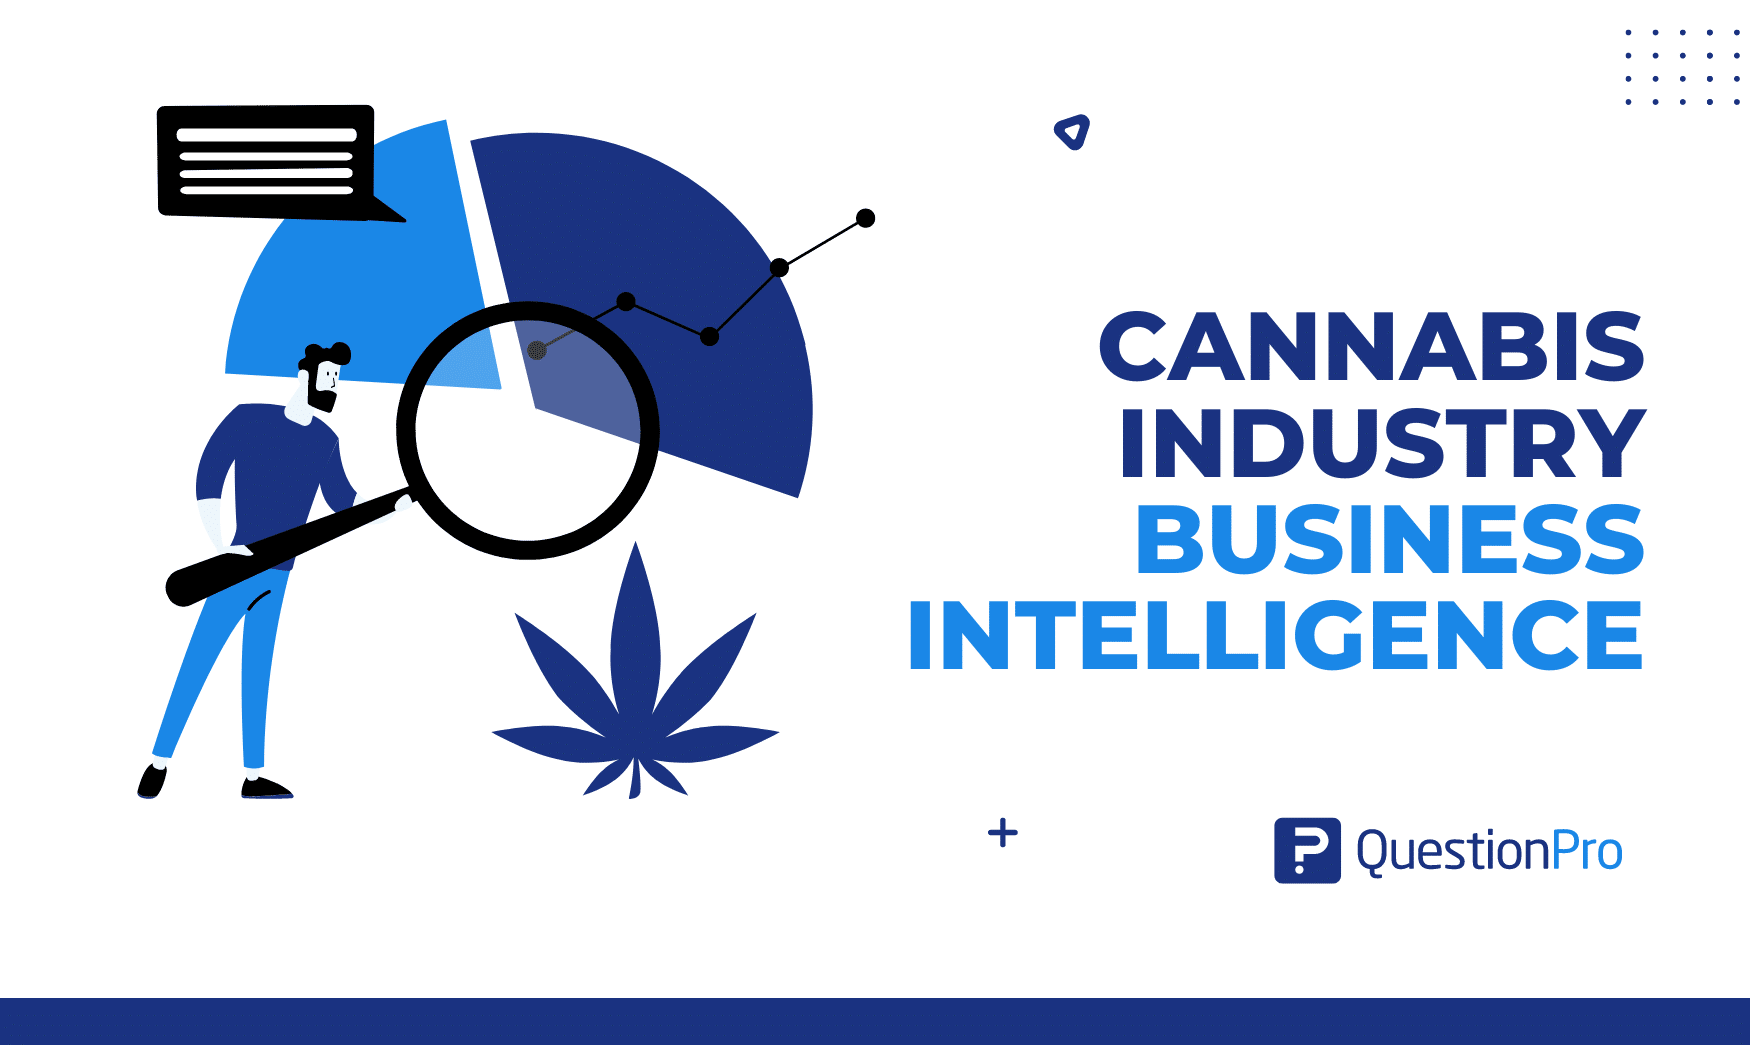 Cannabis Industry Business Intelligence